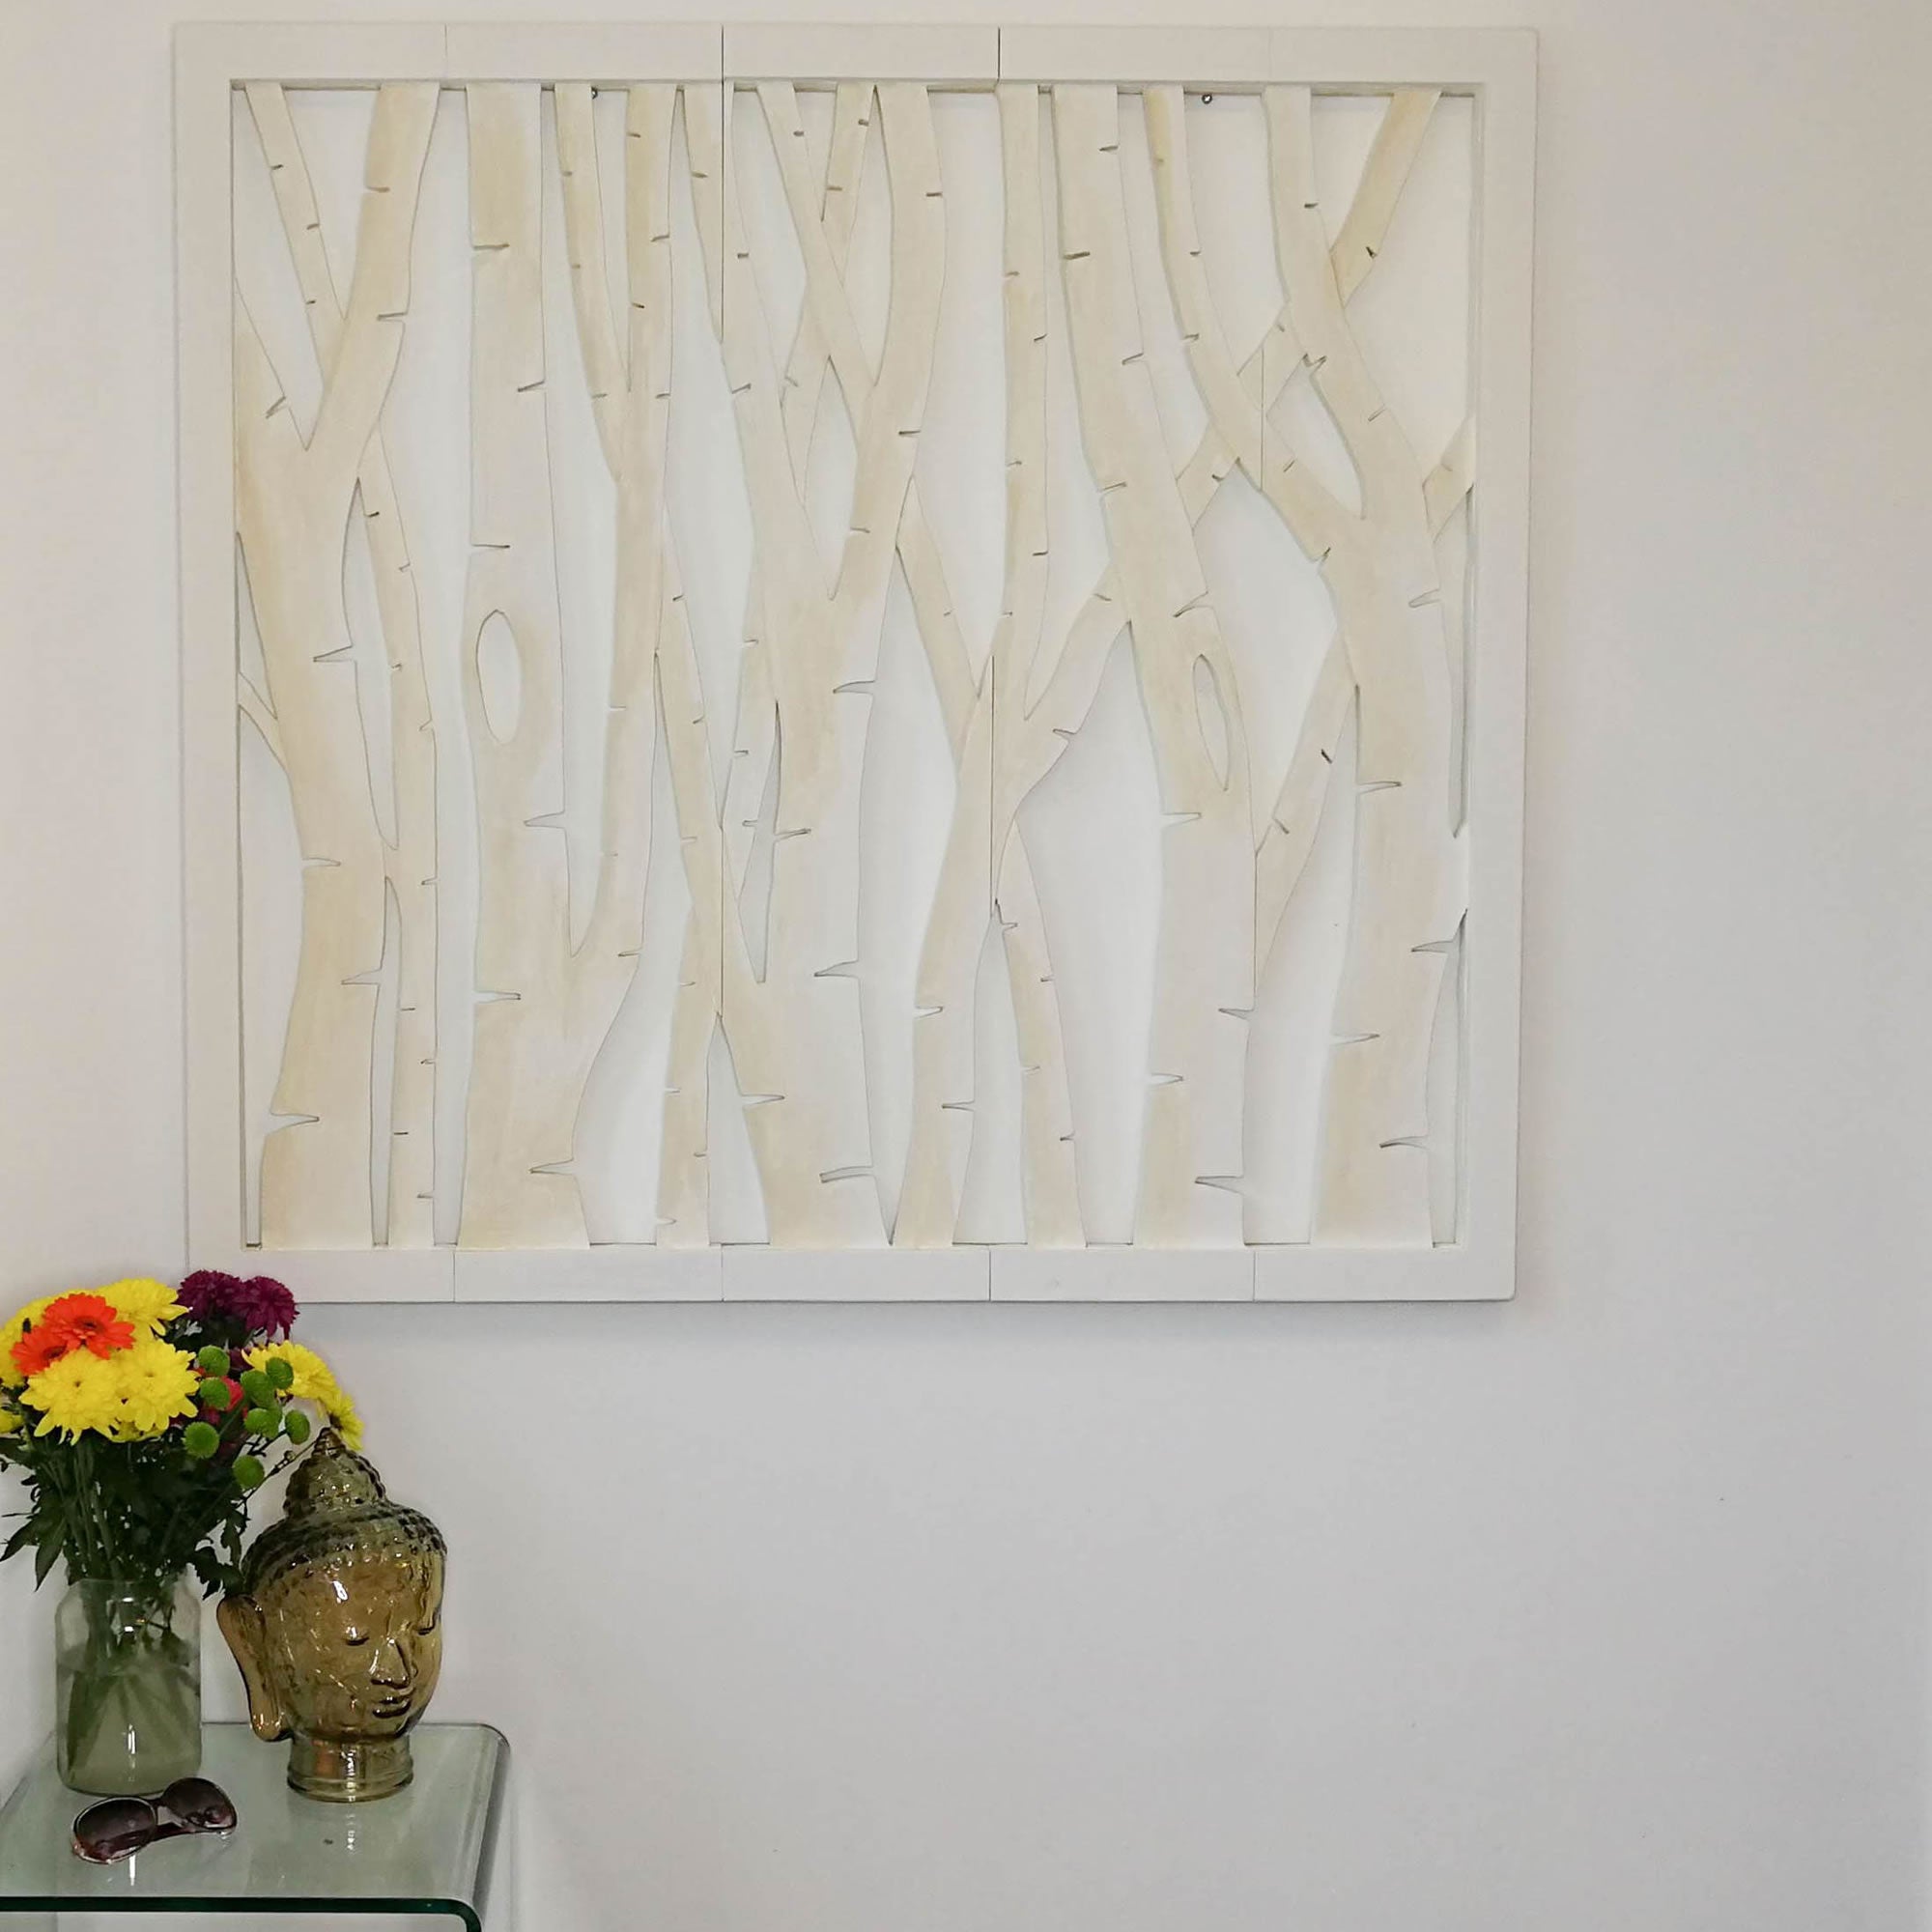 Carved Wooden Wall Art - Large Decorative Birch Trees Headboard